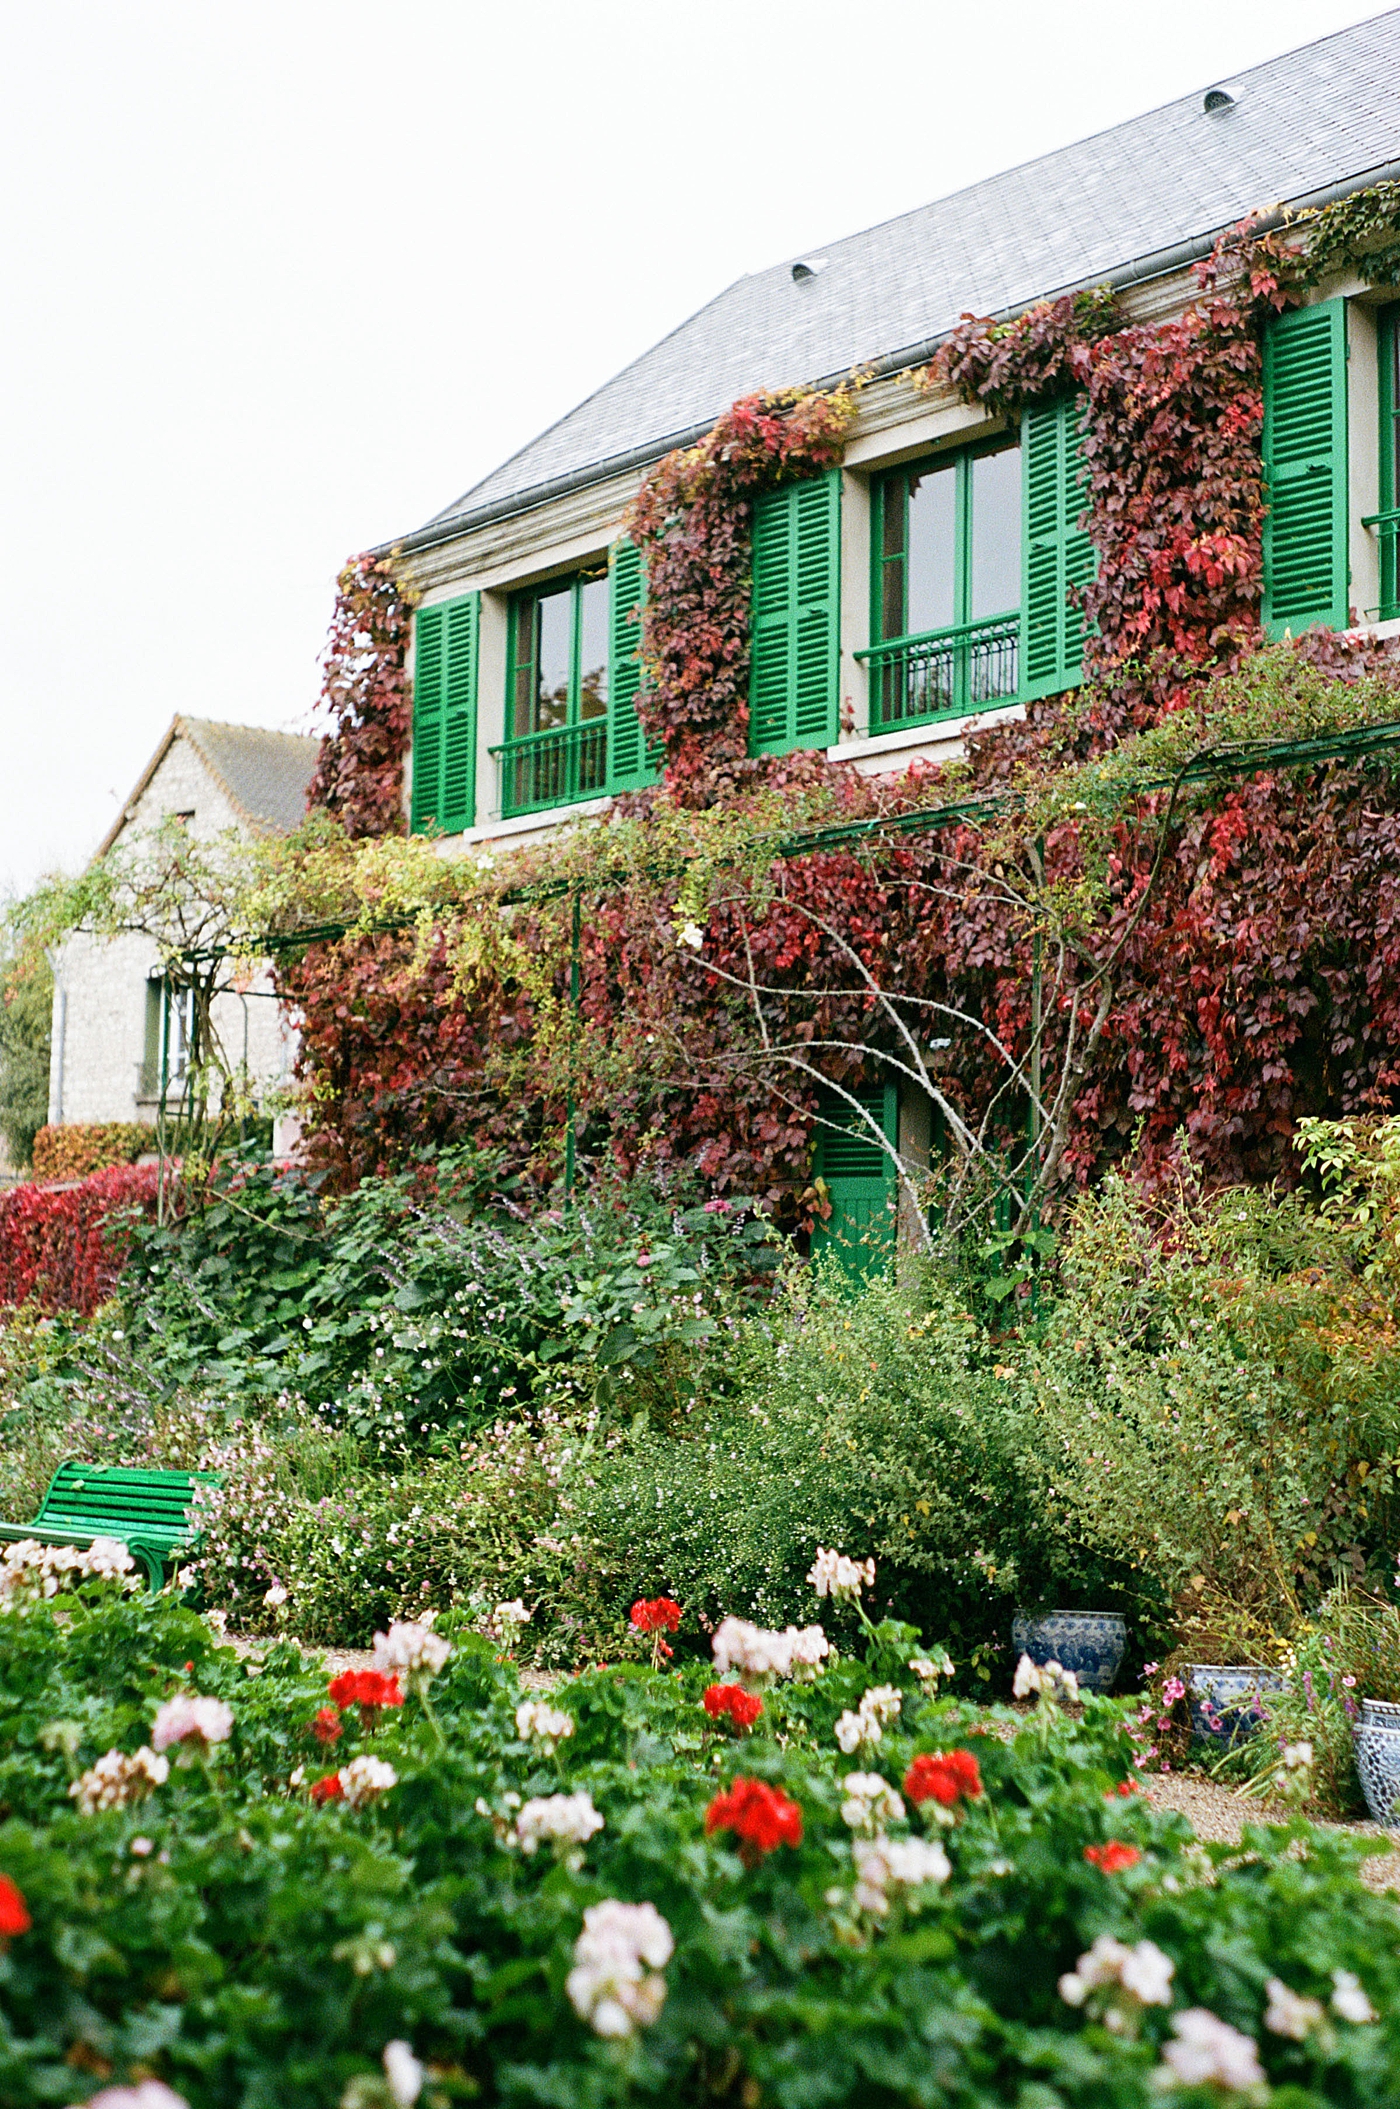 View from the garden of a home covered in climbing vines | Image by Hope Helmuth Photography